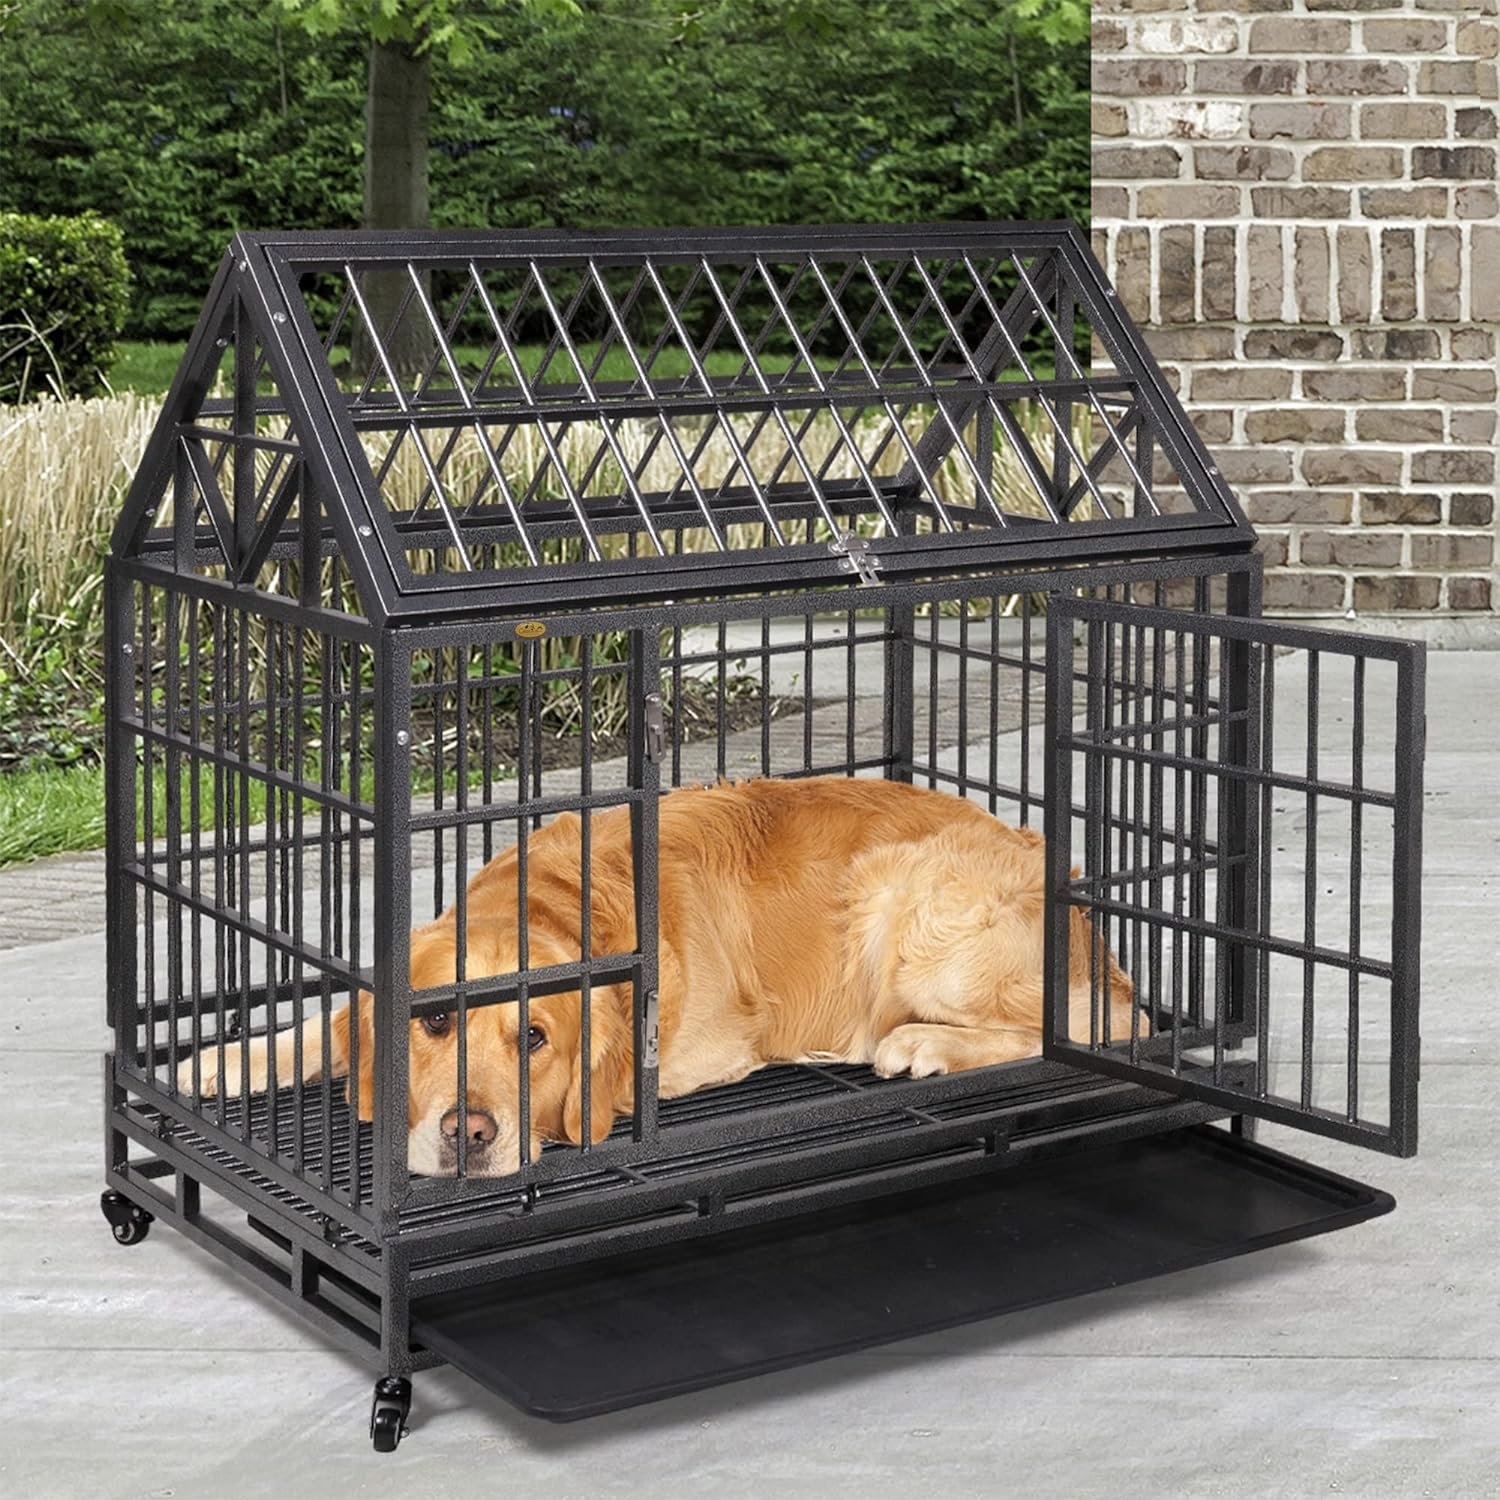 37 dog crates for medium dogs indestructible escape proof dog kennel indoor with wheels heavy duty dog cages metal high 1 4